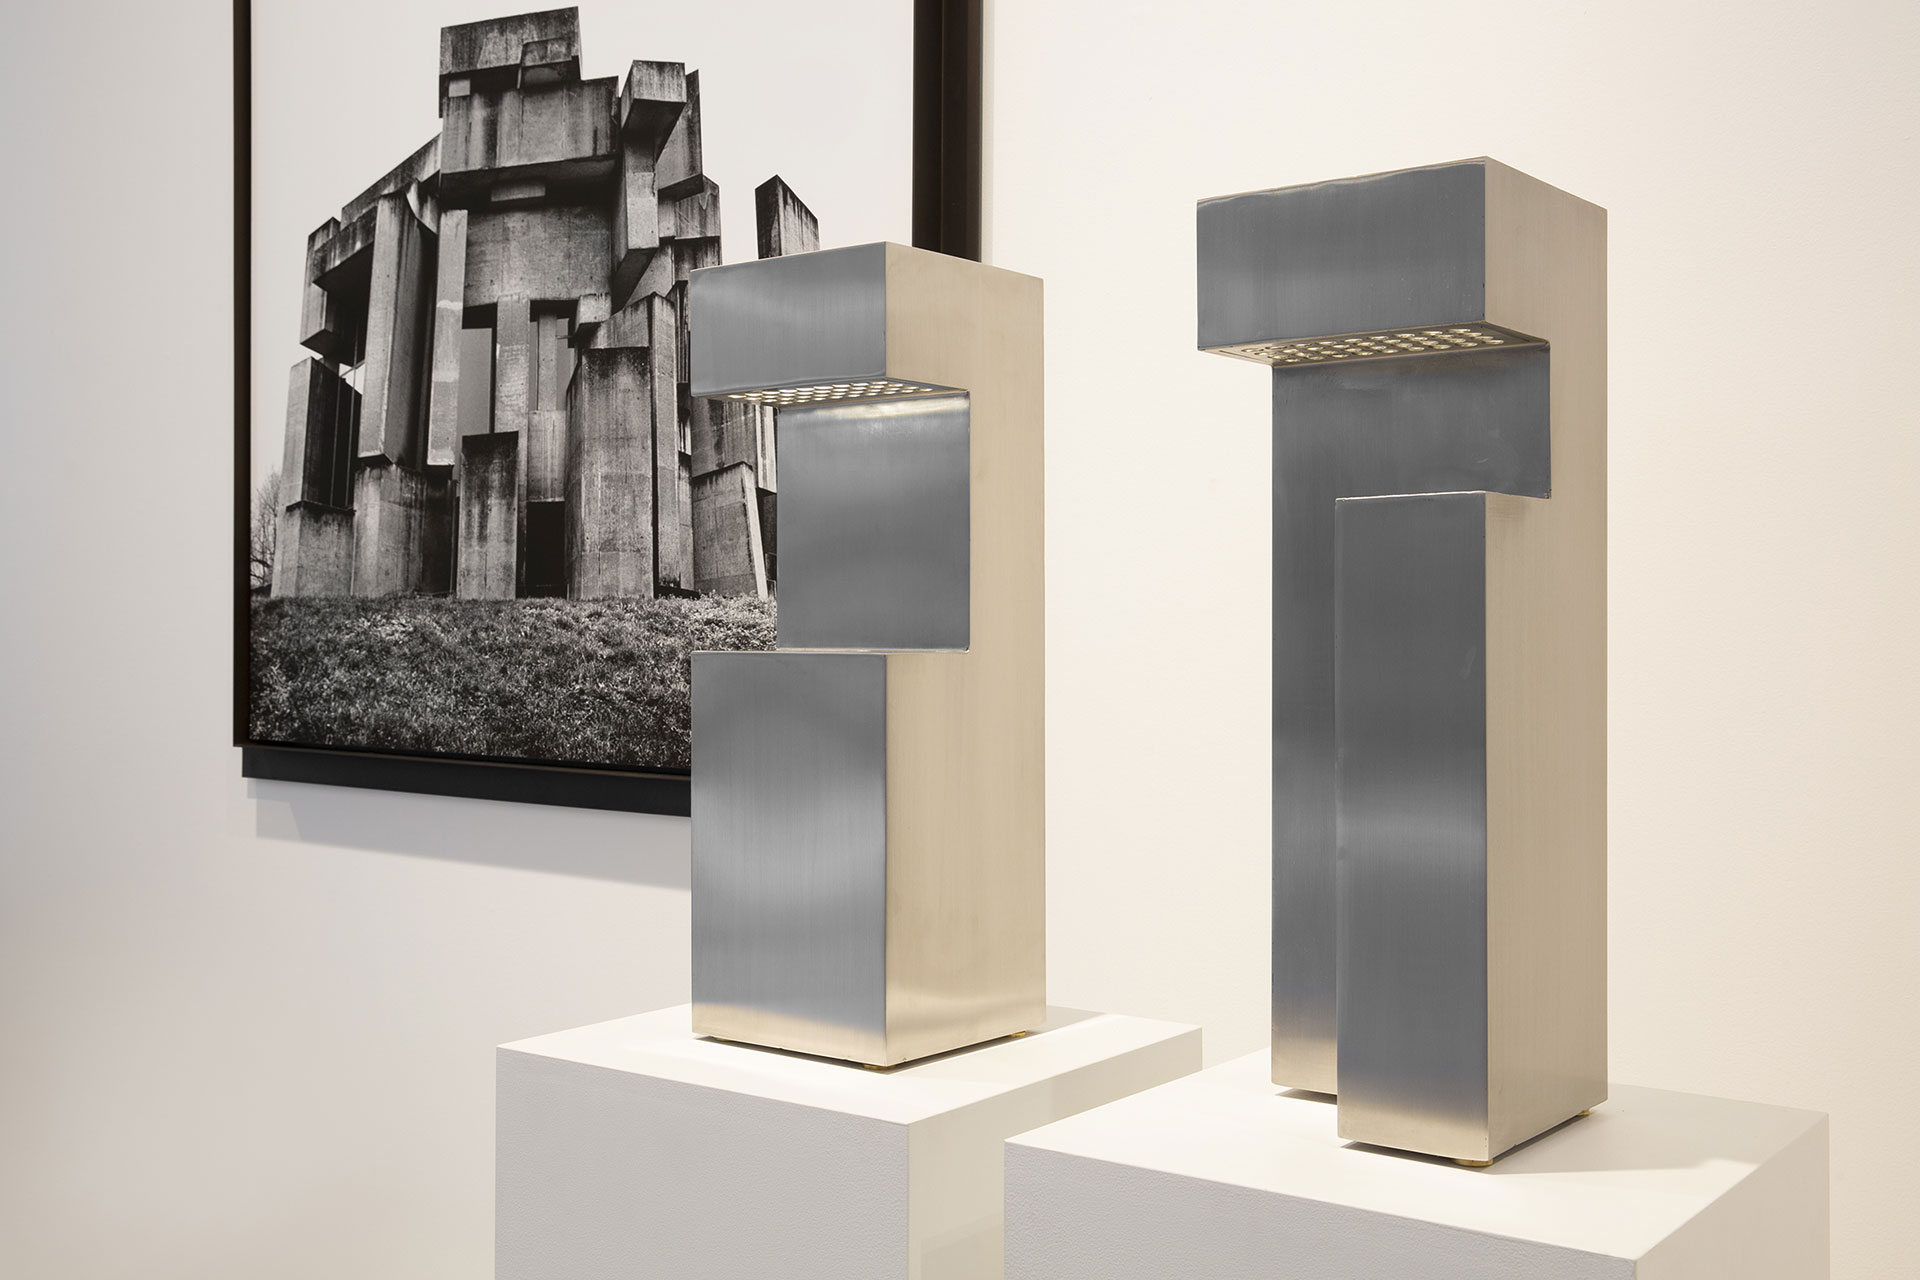 Bloc floor lamps are influenced by the Wotruba church in Vienna